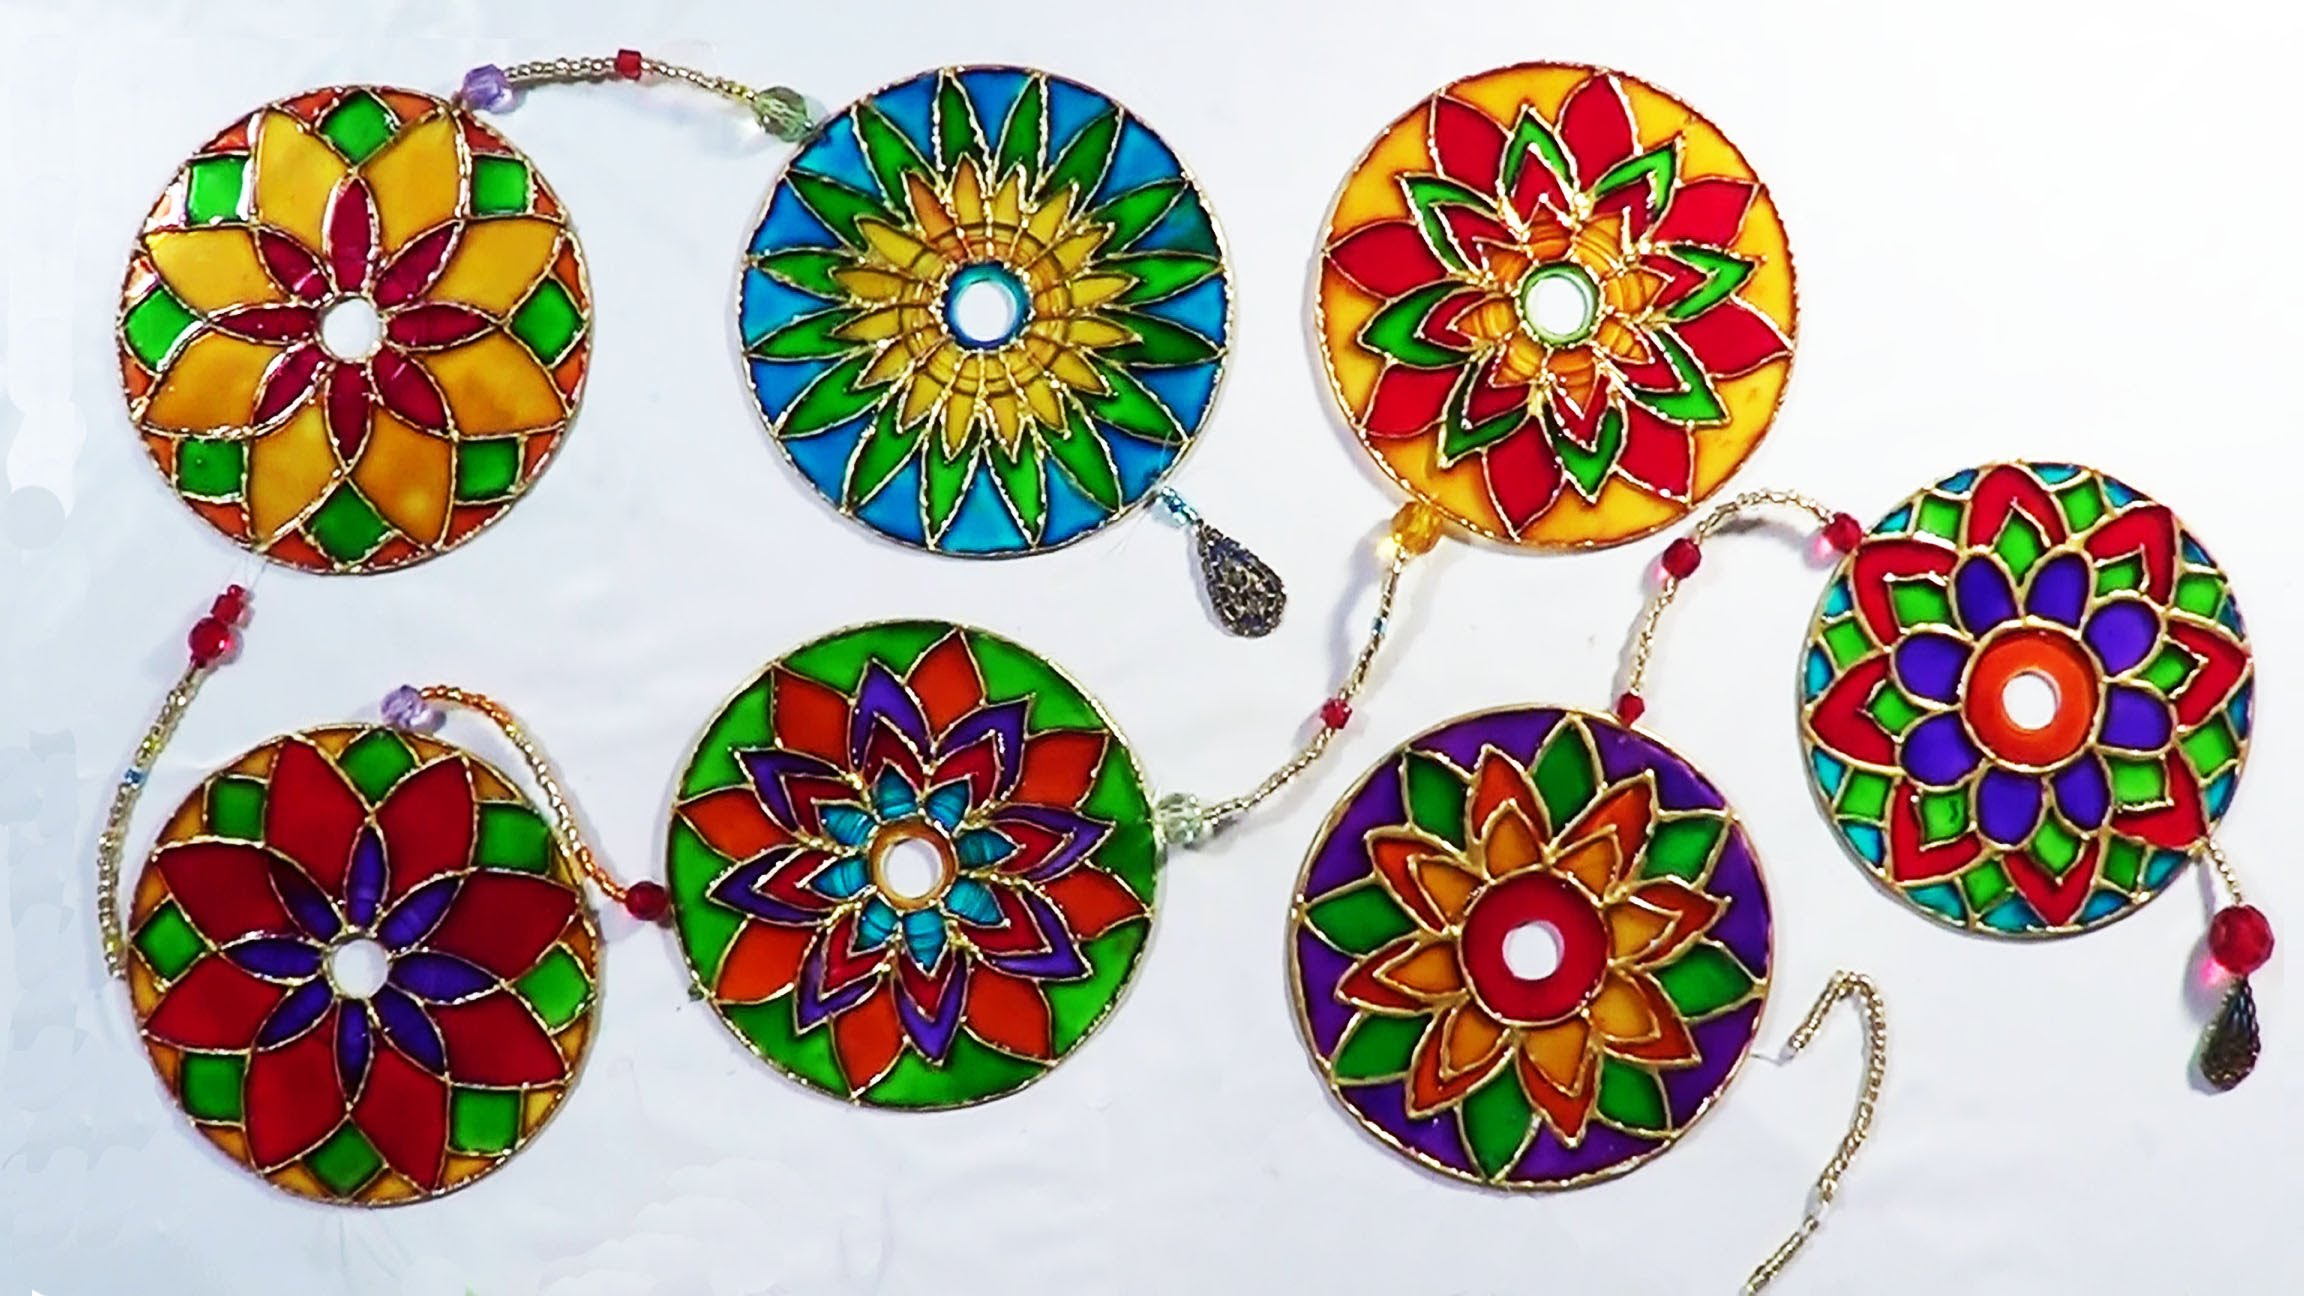 Peel and Paint a CD to Put New Spin on Sun Catchers